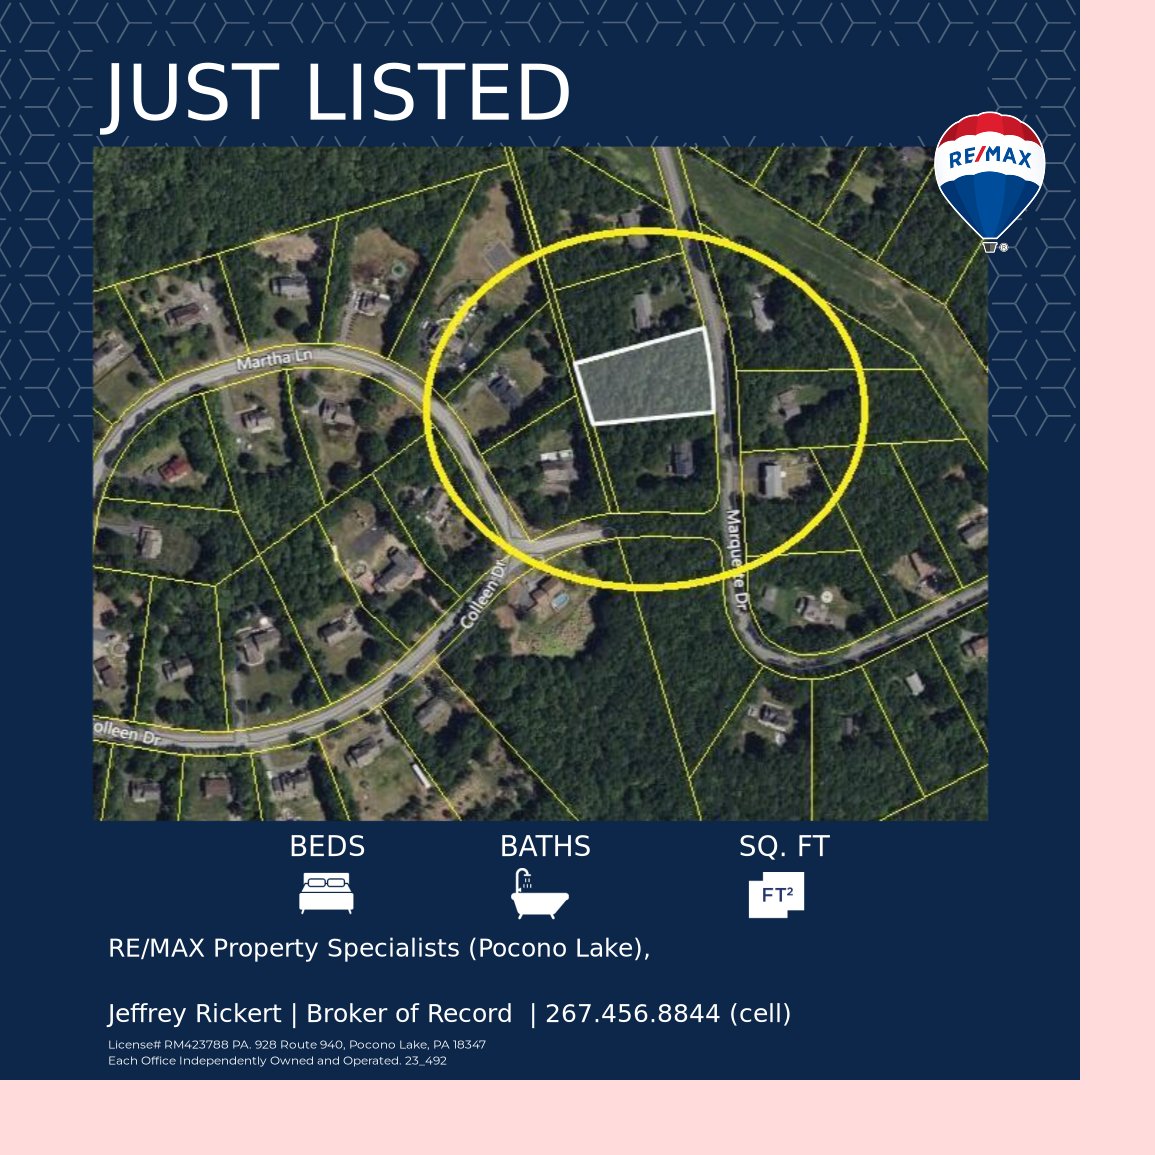 Land looking to build your dream home?

REMAX Property Specialists 
570 972 2940
#land #poconolake #pocono #newconstruction #Chalet #newhome #blakeslee #build